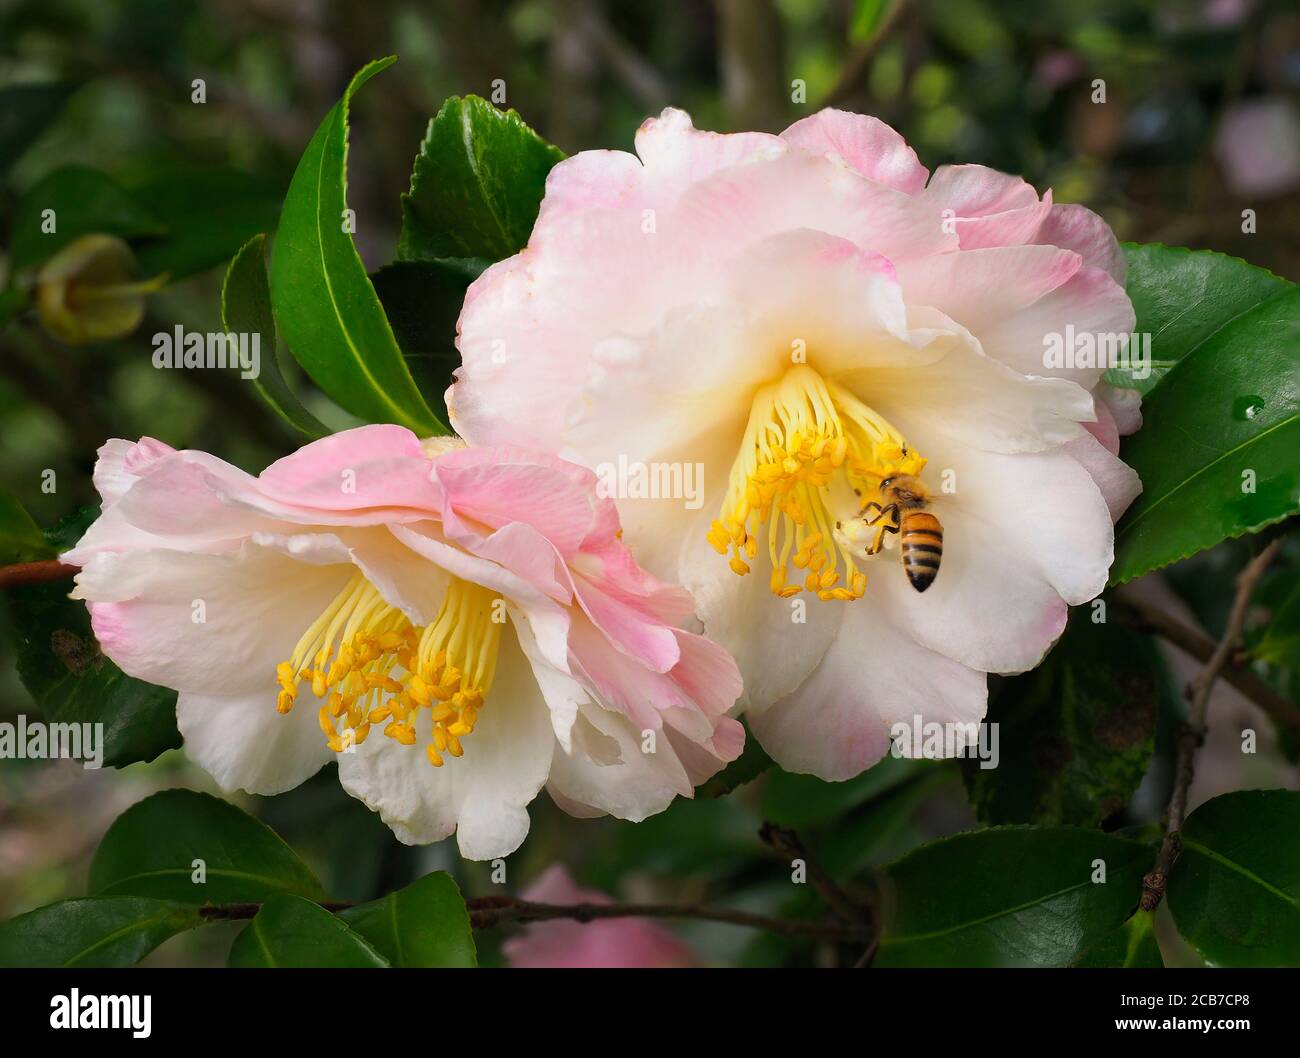 A Focus Stacked Closeup Image of Pink and White Camellias with a Honey Bee Stock Photo